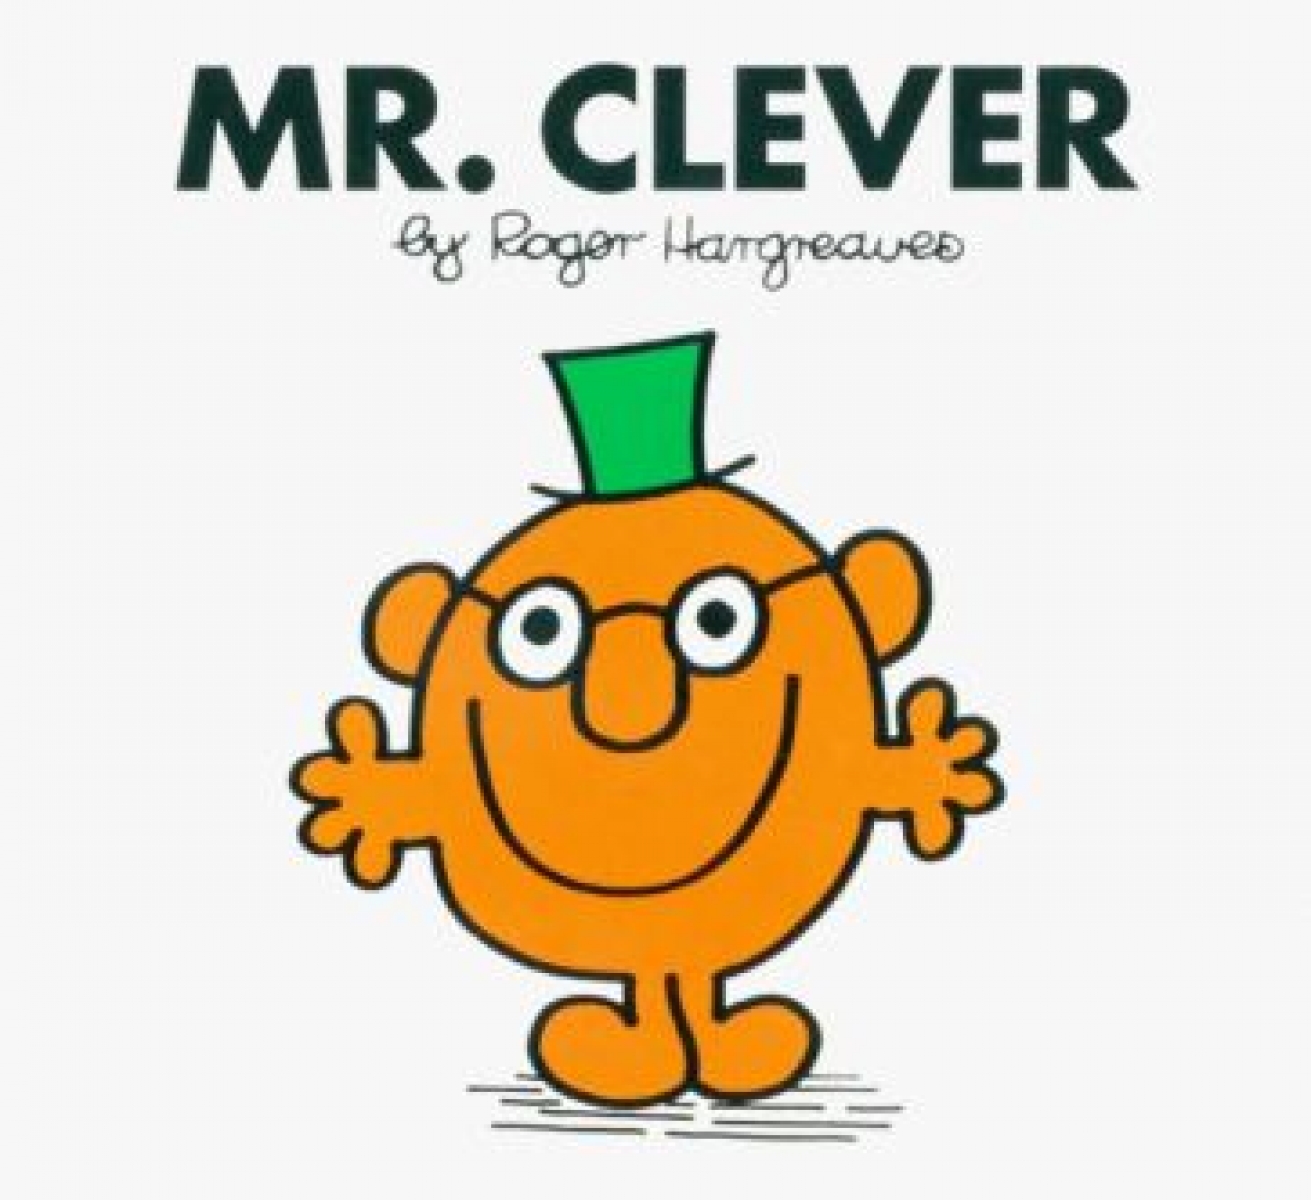 Hargreaves Roger Mr. Clever 